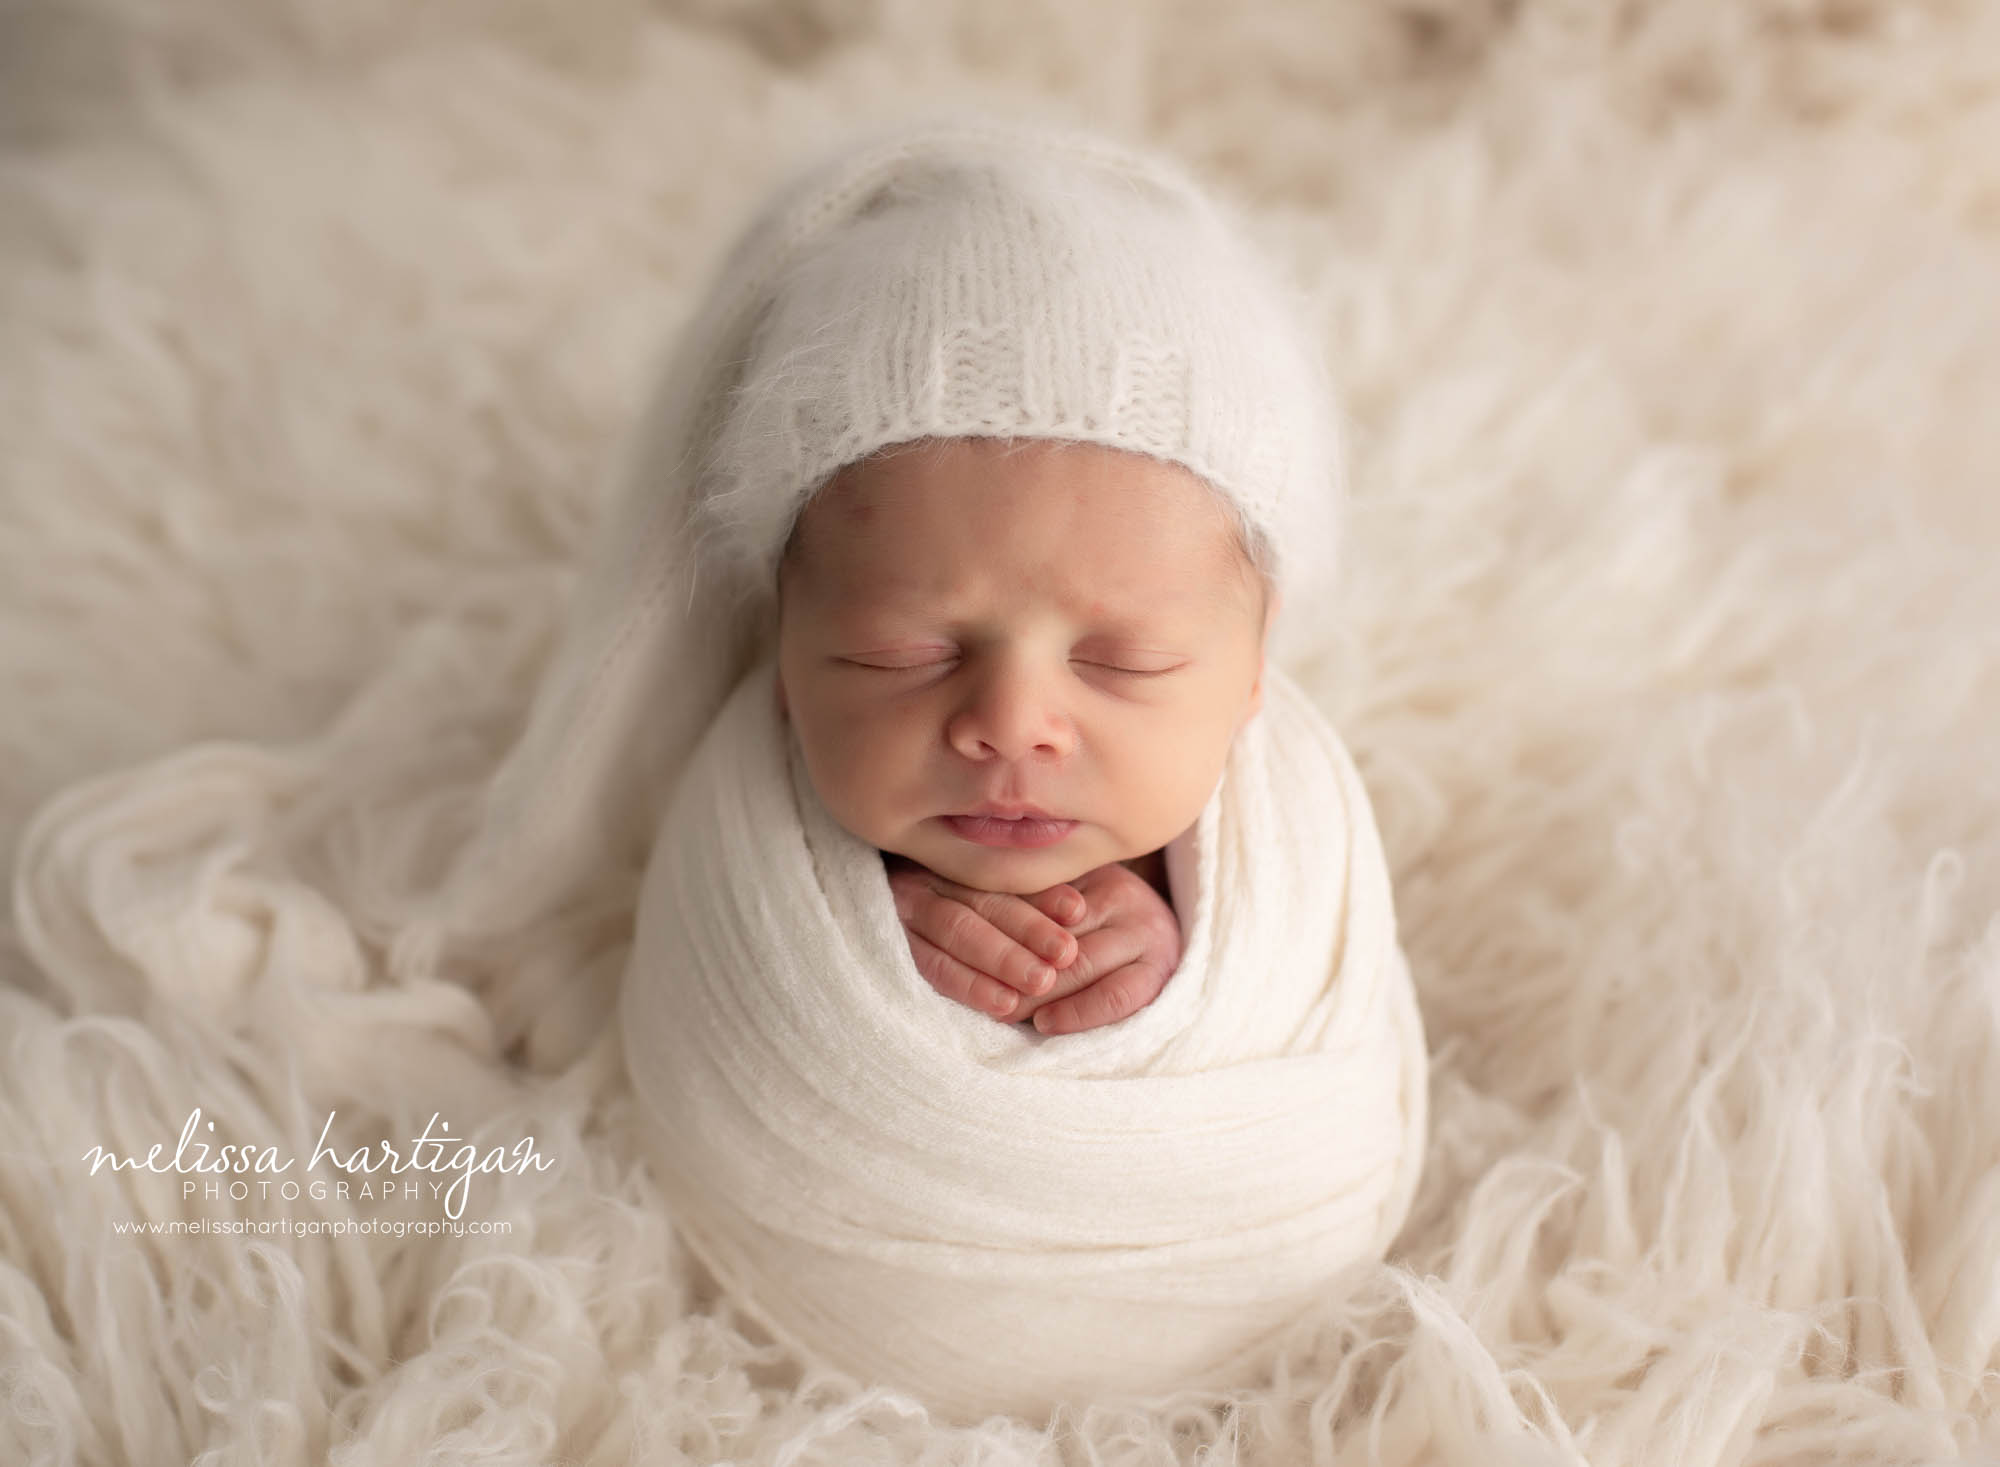 baby wrapped in cream colored wrap and wearing knitted sleepy cap on cream flokati rug